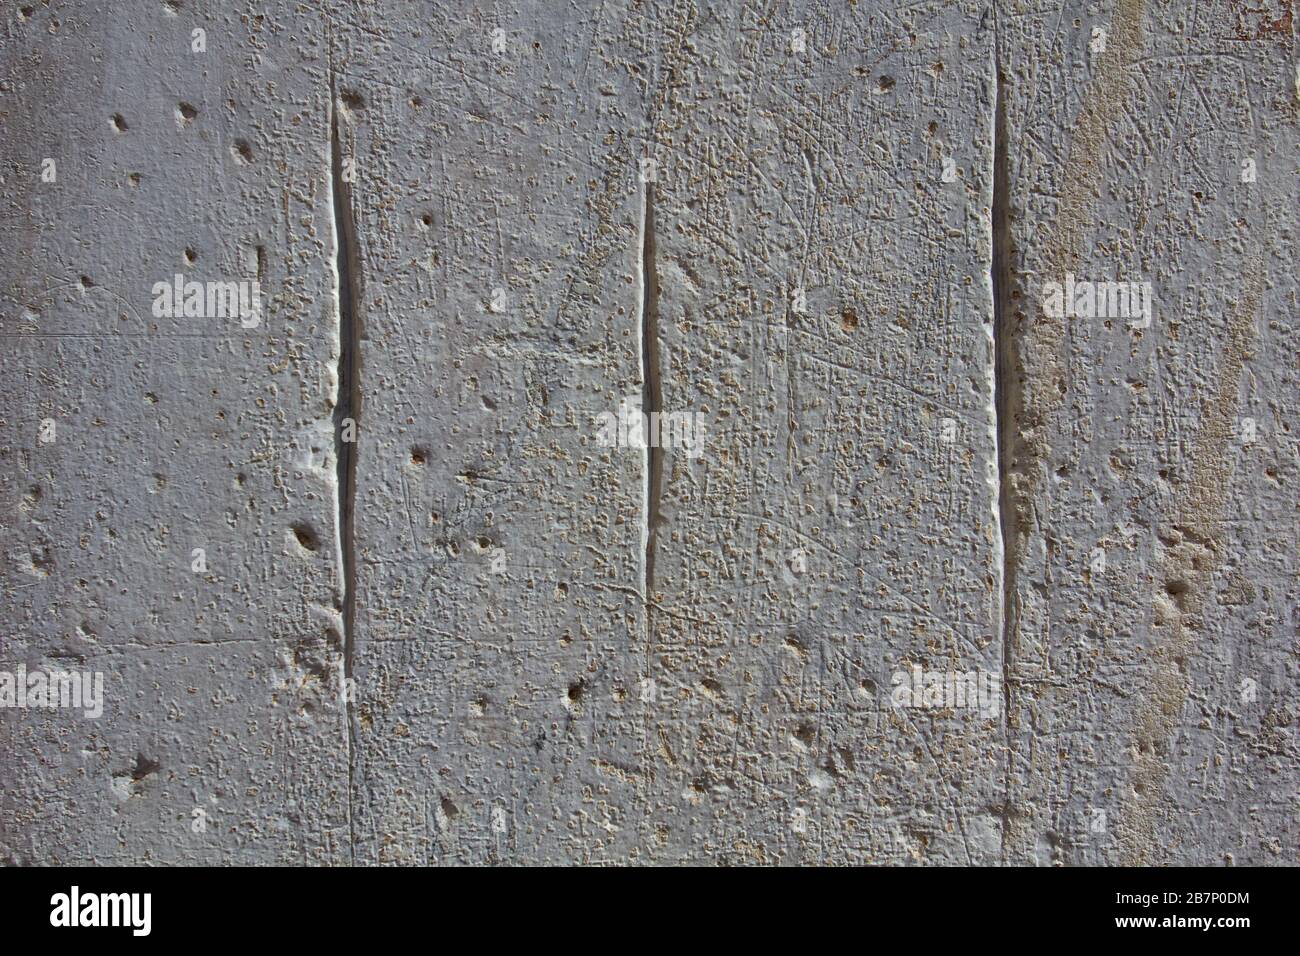 The Devil’s scratches - Lucca, Tuscany, Italy Stock Photo